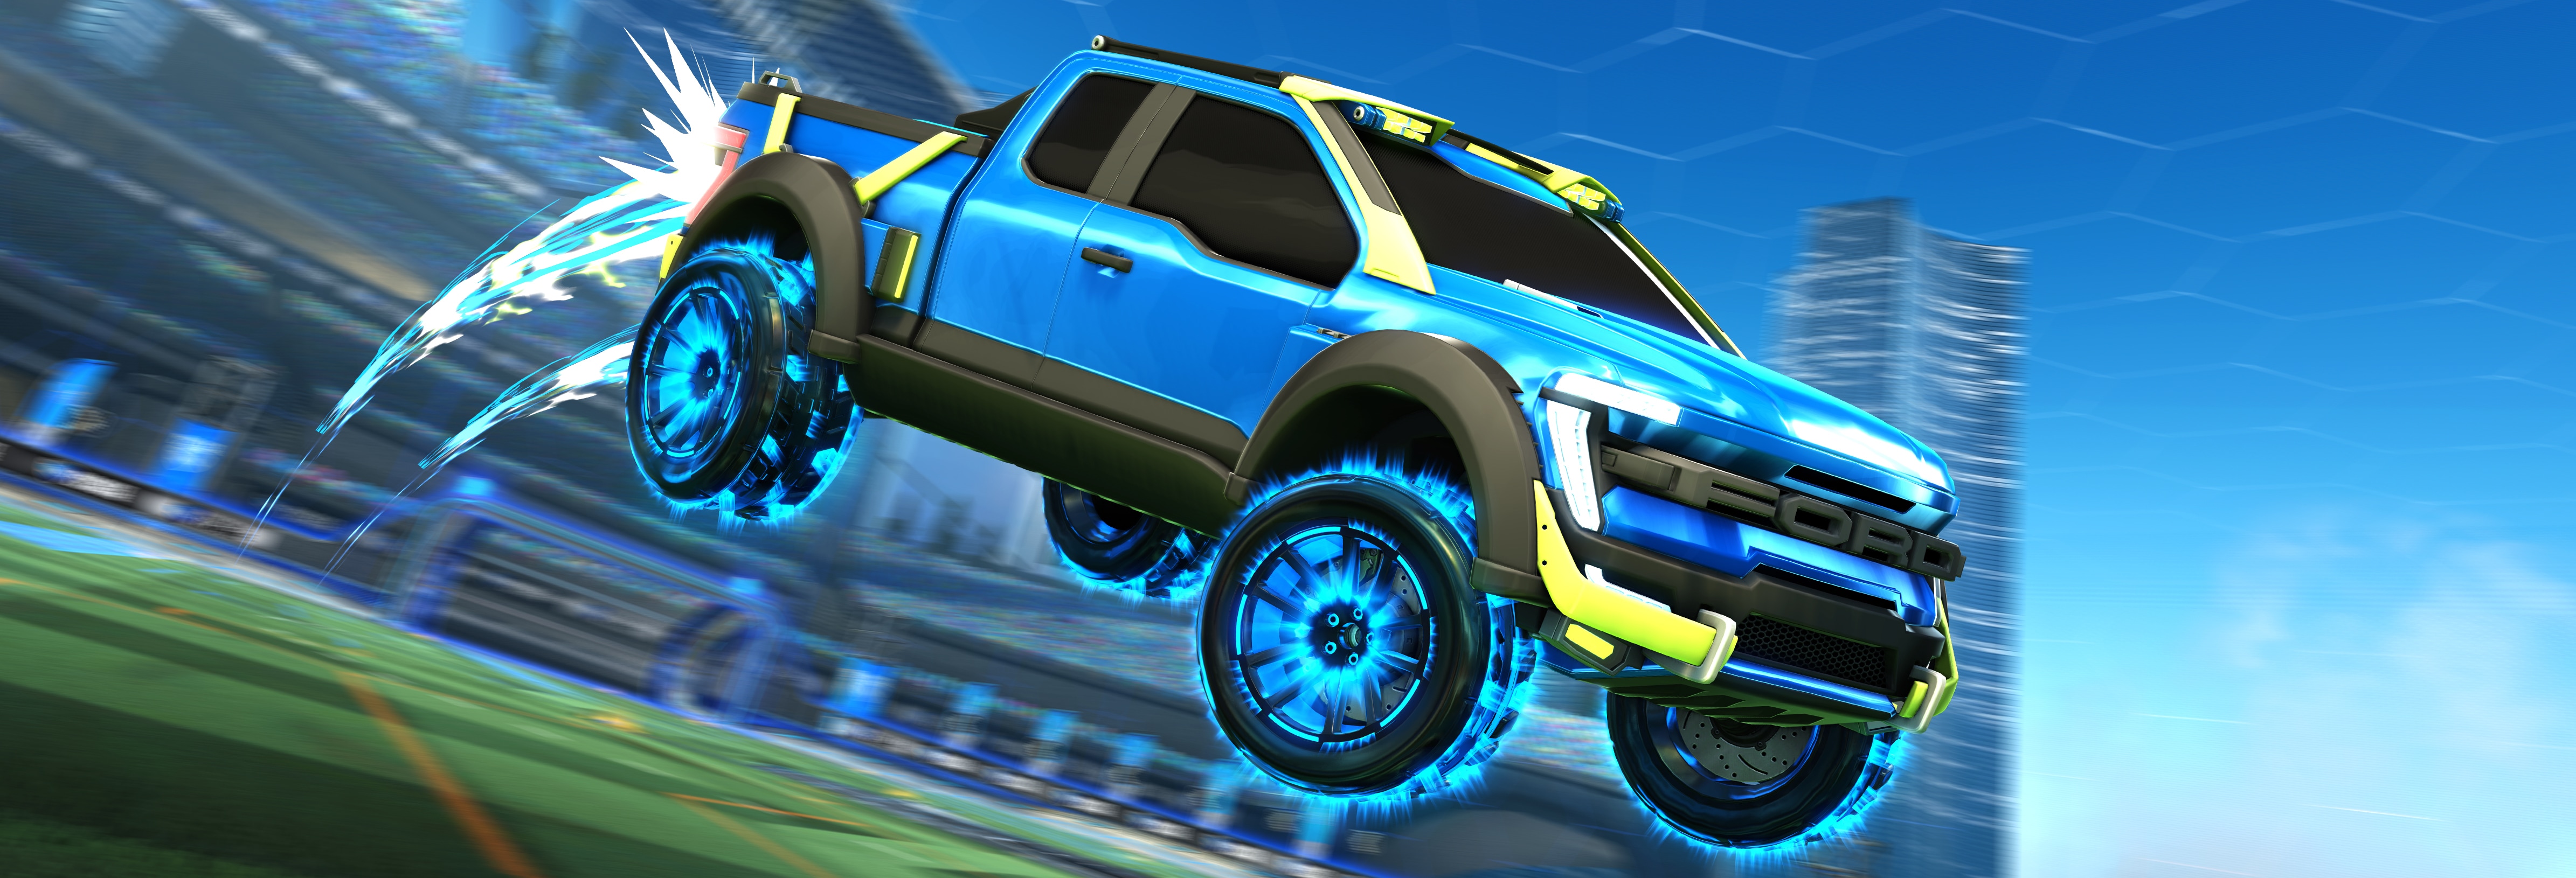 Exclusive F-150 Rocket League Edition Set for Launch as Ford